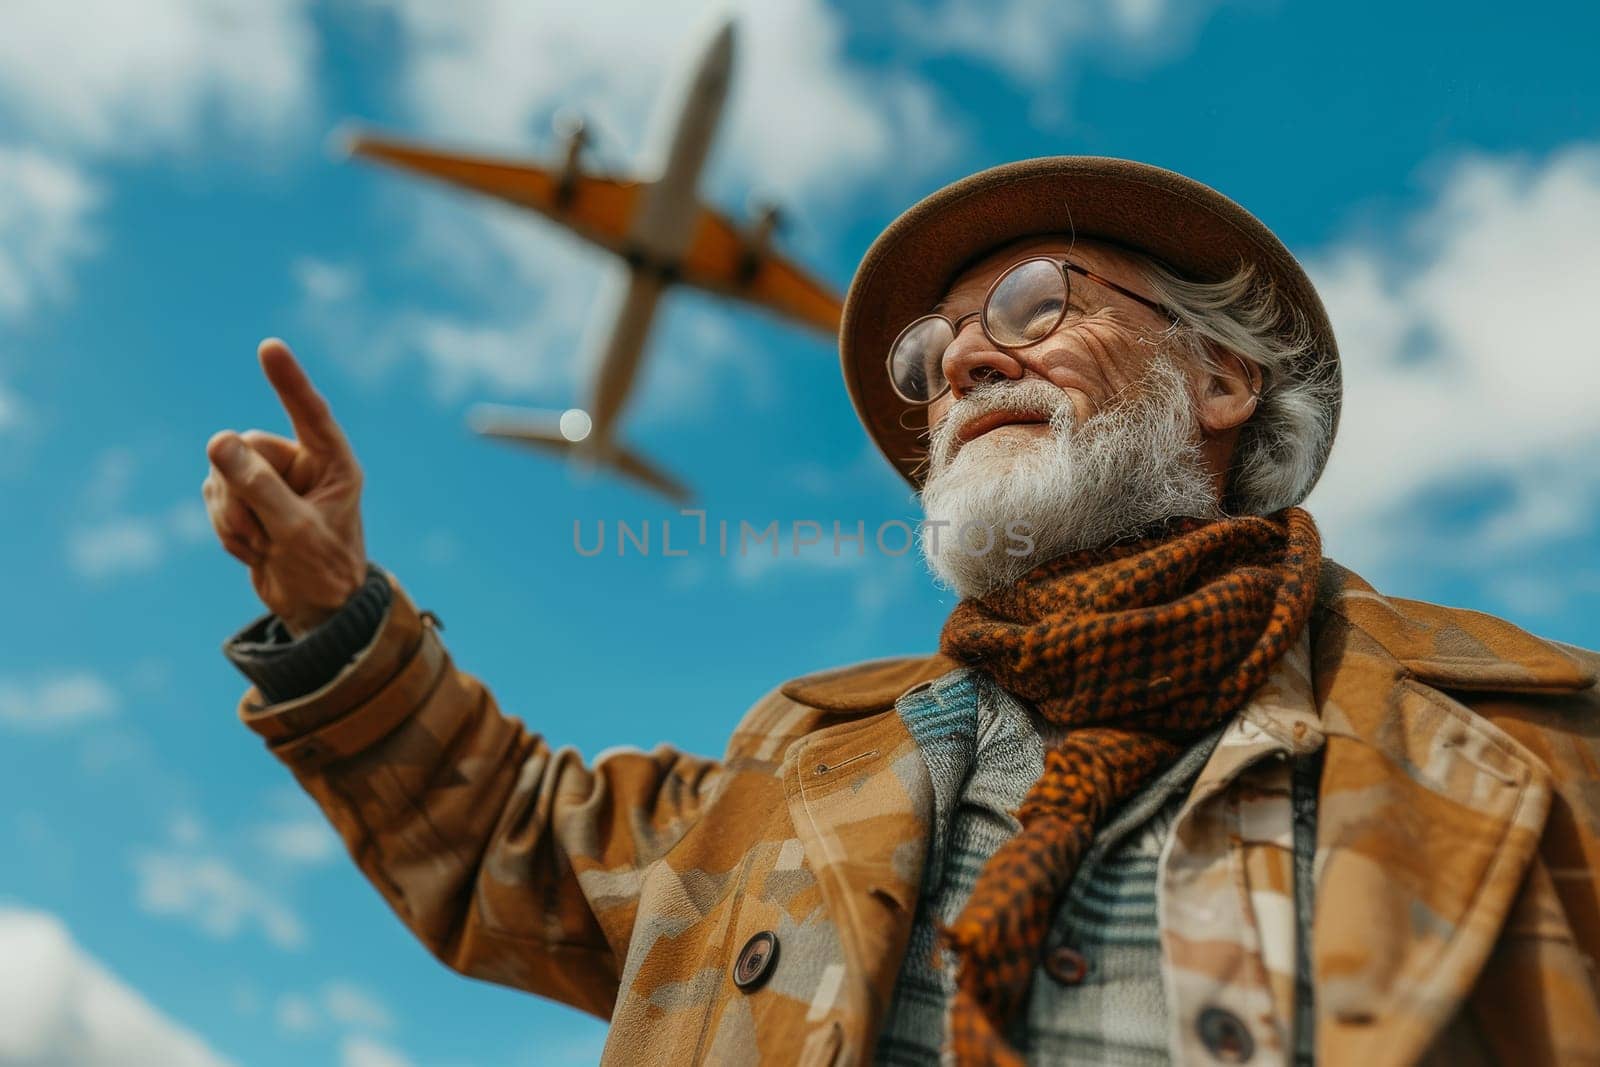 An older man wearing a leather jacket points to an airplane flying in the sky. Concept of adventure and excitement, as the man is looking up at the plane with a sense of wonder